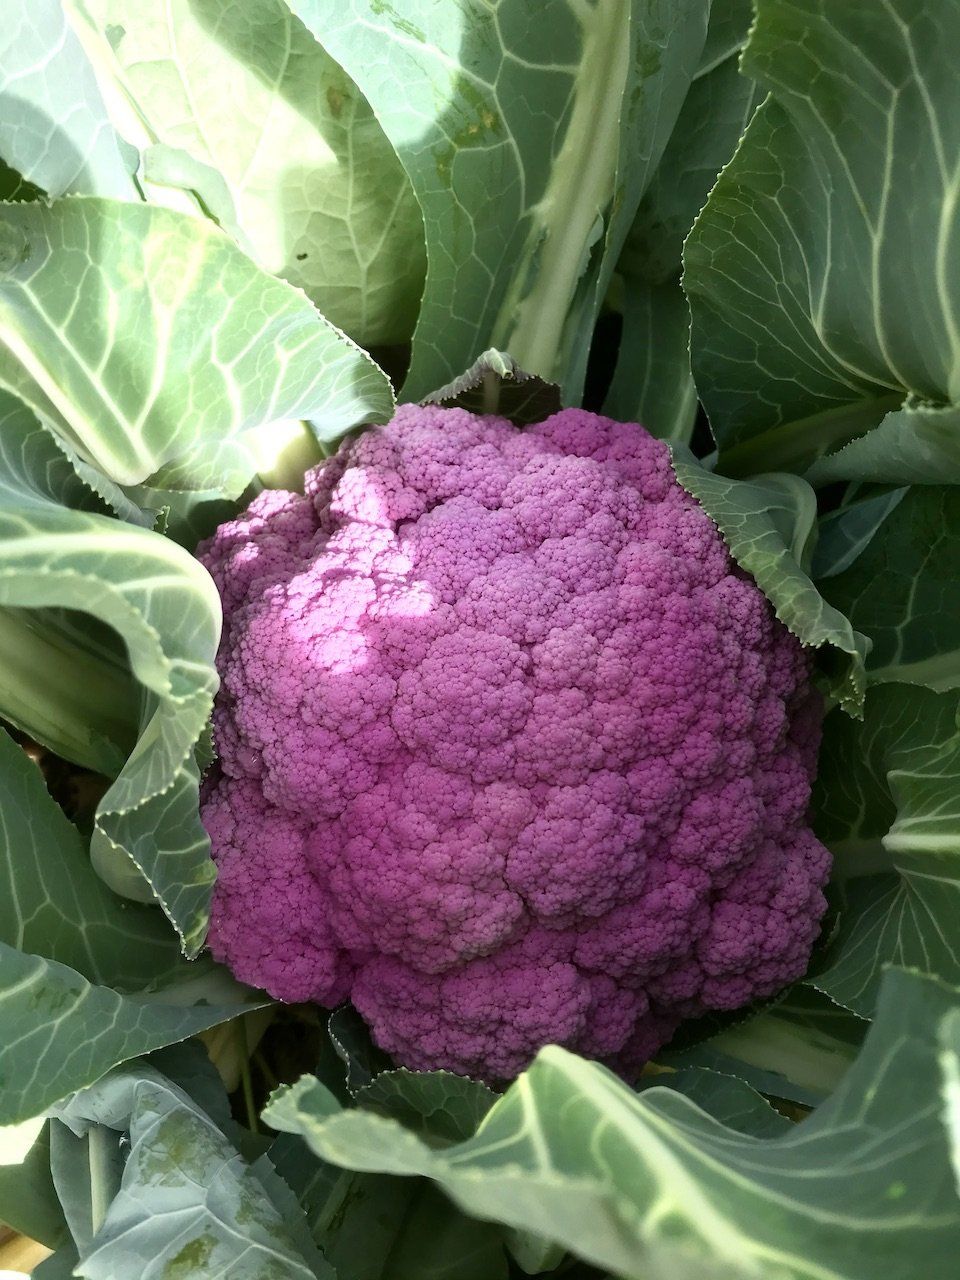 Purple Cauliflower, Delicata, and Mustard Greens Available this Week